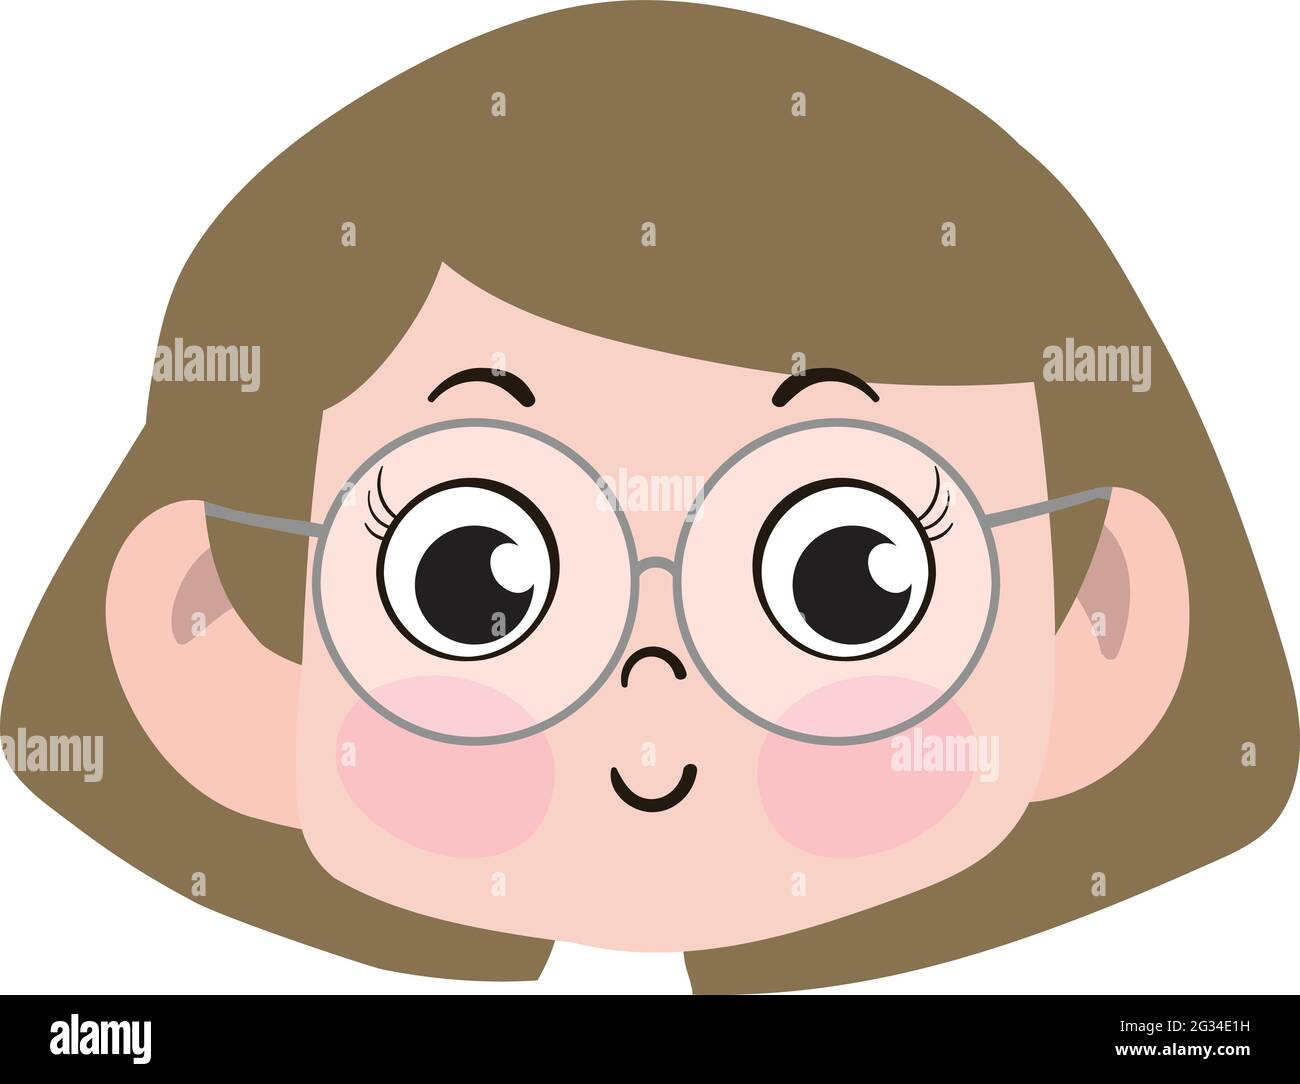 Guilty or innocent Stock Vector Images - Alamy